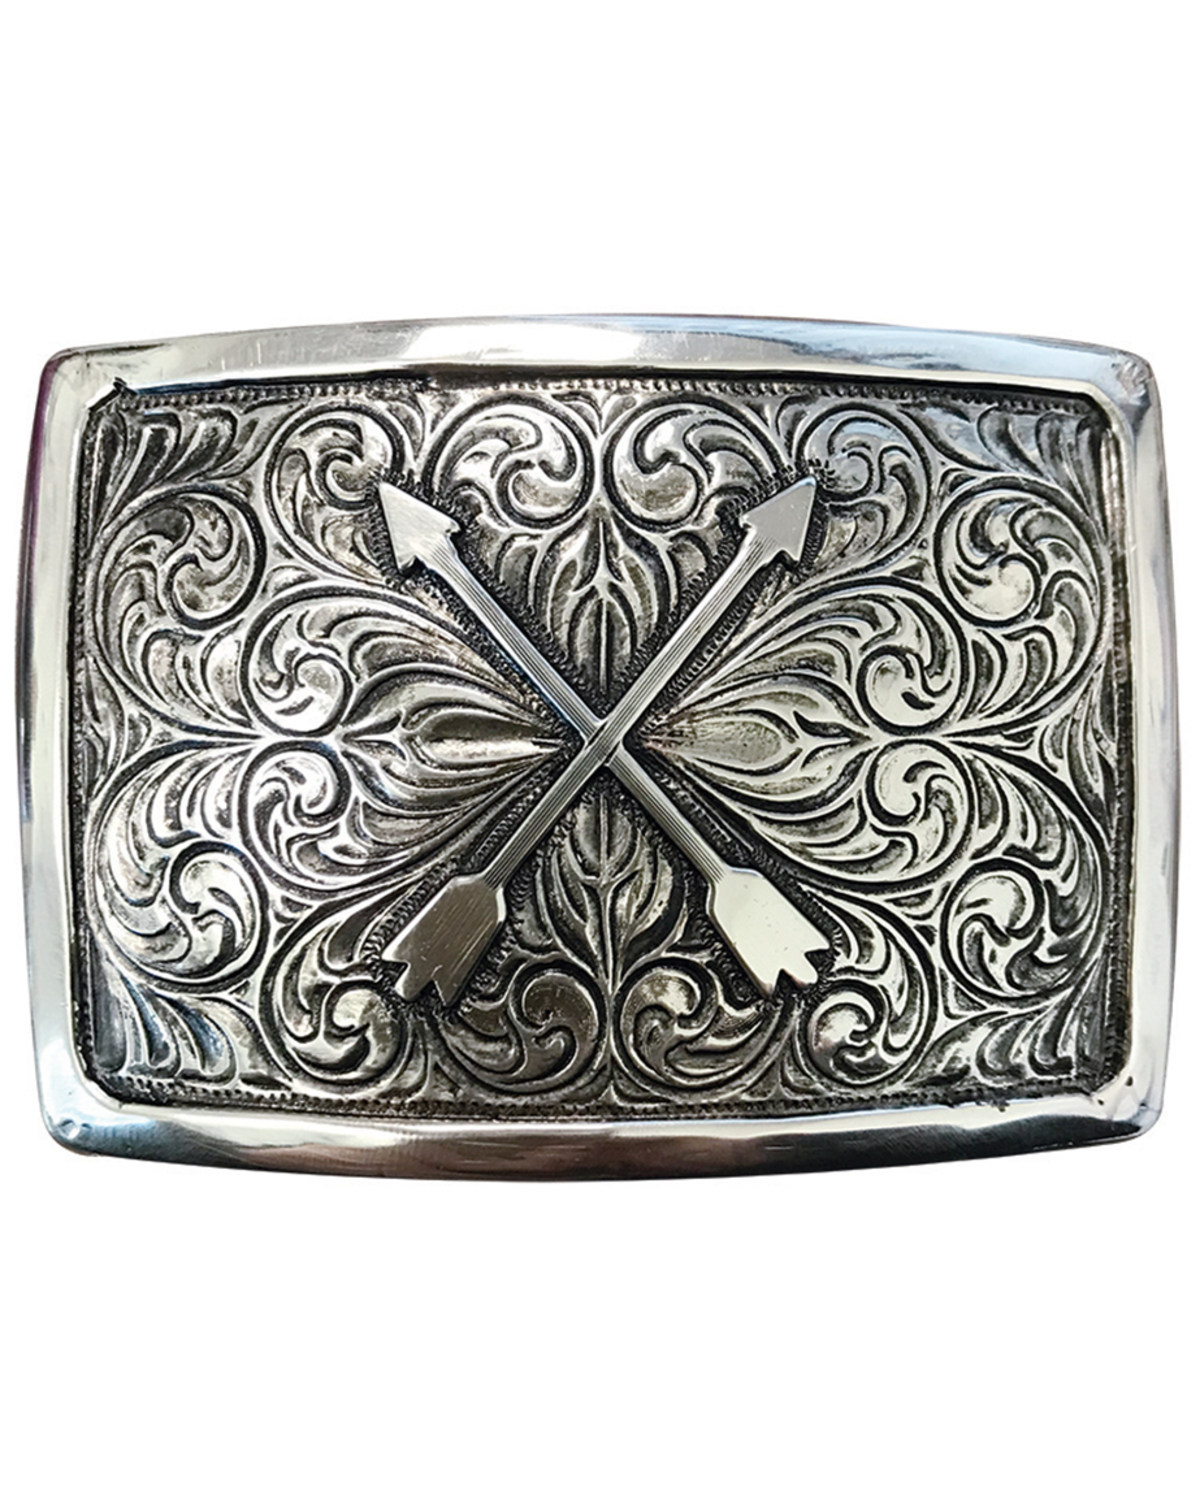 AndWest Antique Silver Crossed Arrows Buckle